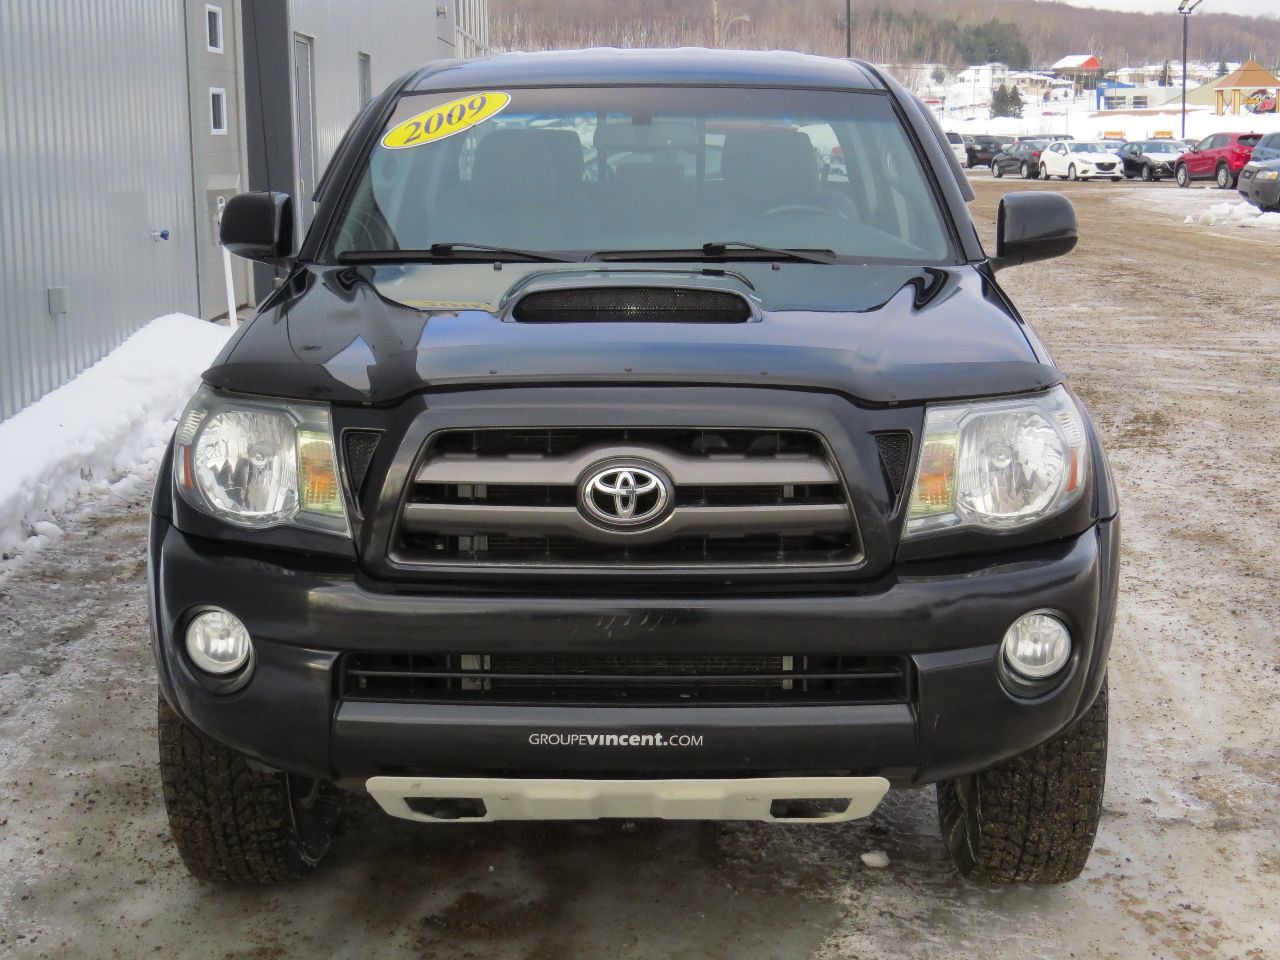 2009 Toyota tacoma trd pictures